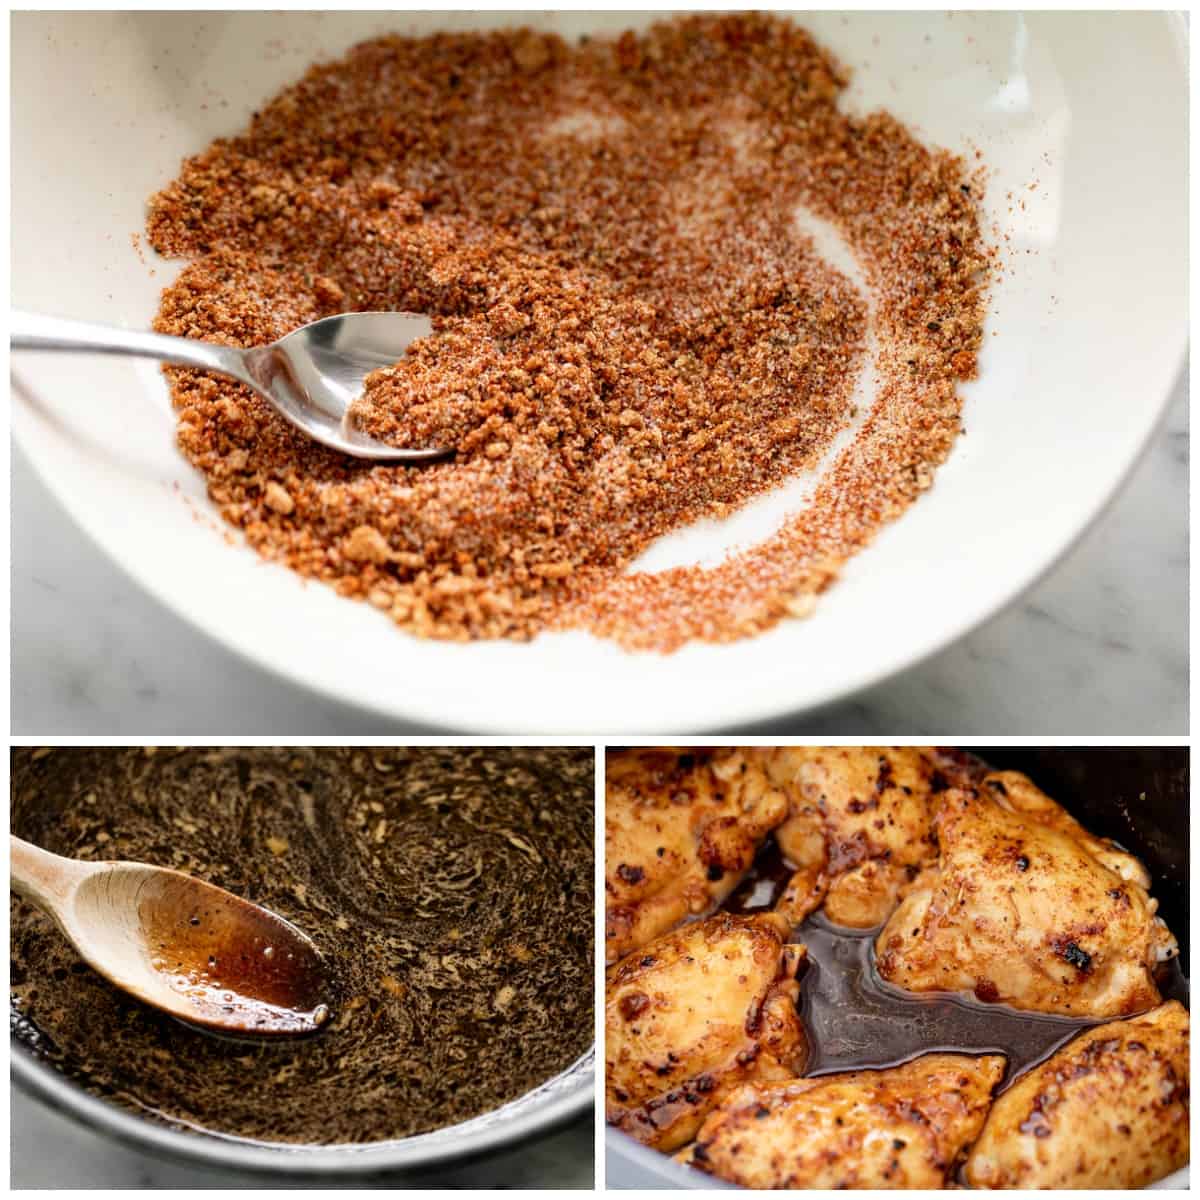 Seasoning and sauce collage for a Slow Cooker Honey Garlic Chicken recipe